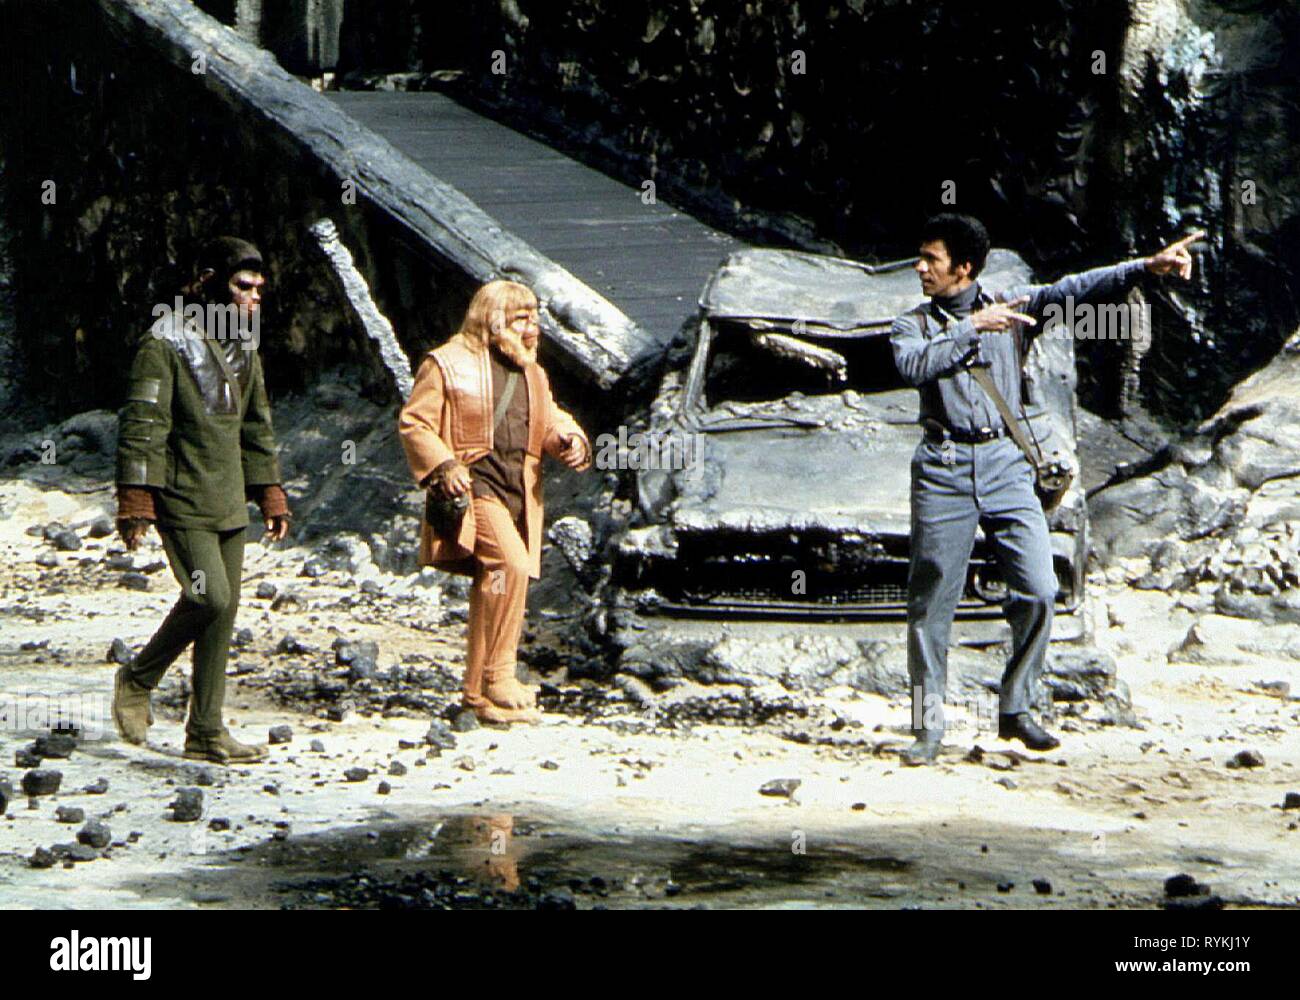 MCDOWALL,STOKER, BATTLE FOR THE PLANET OF THE APES, 1973 Stock Photo